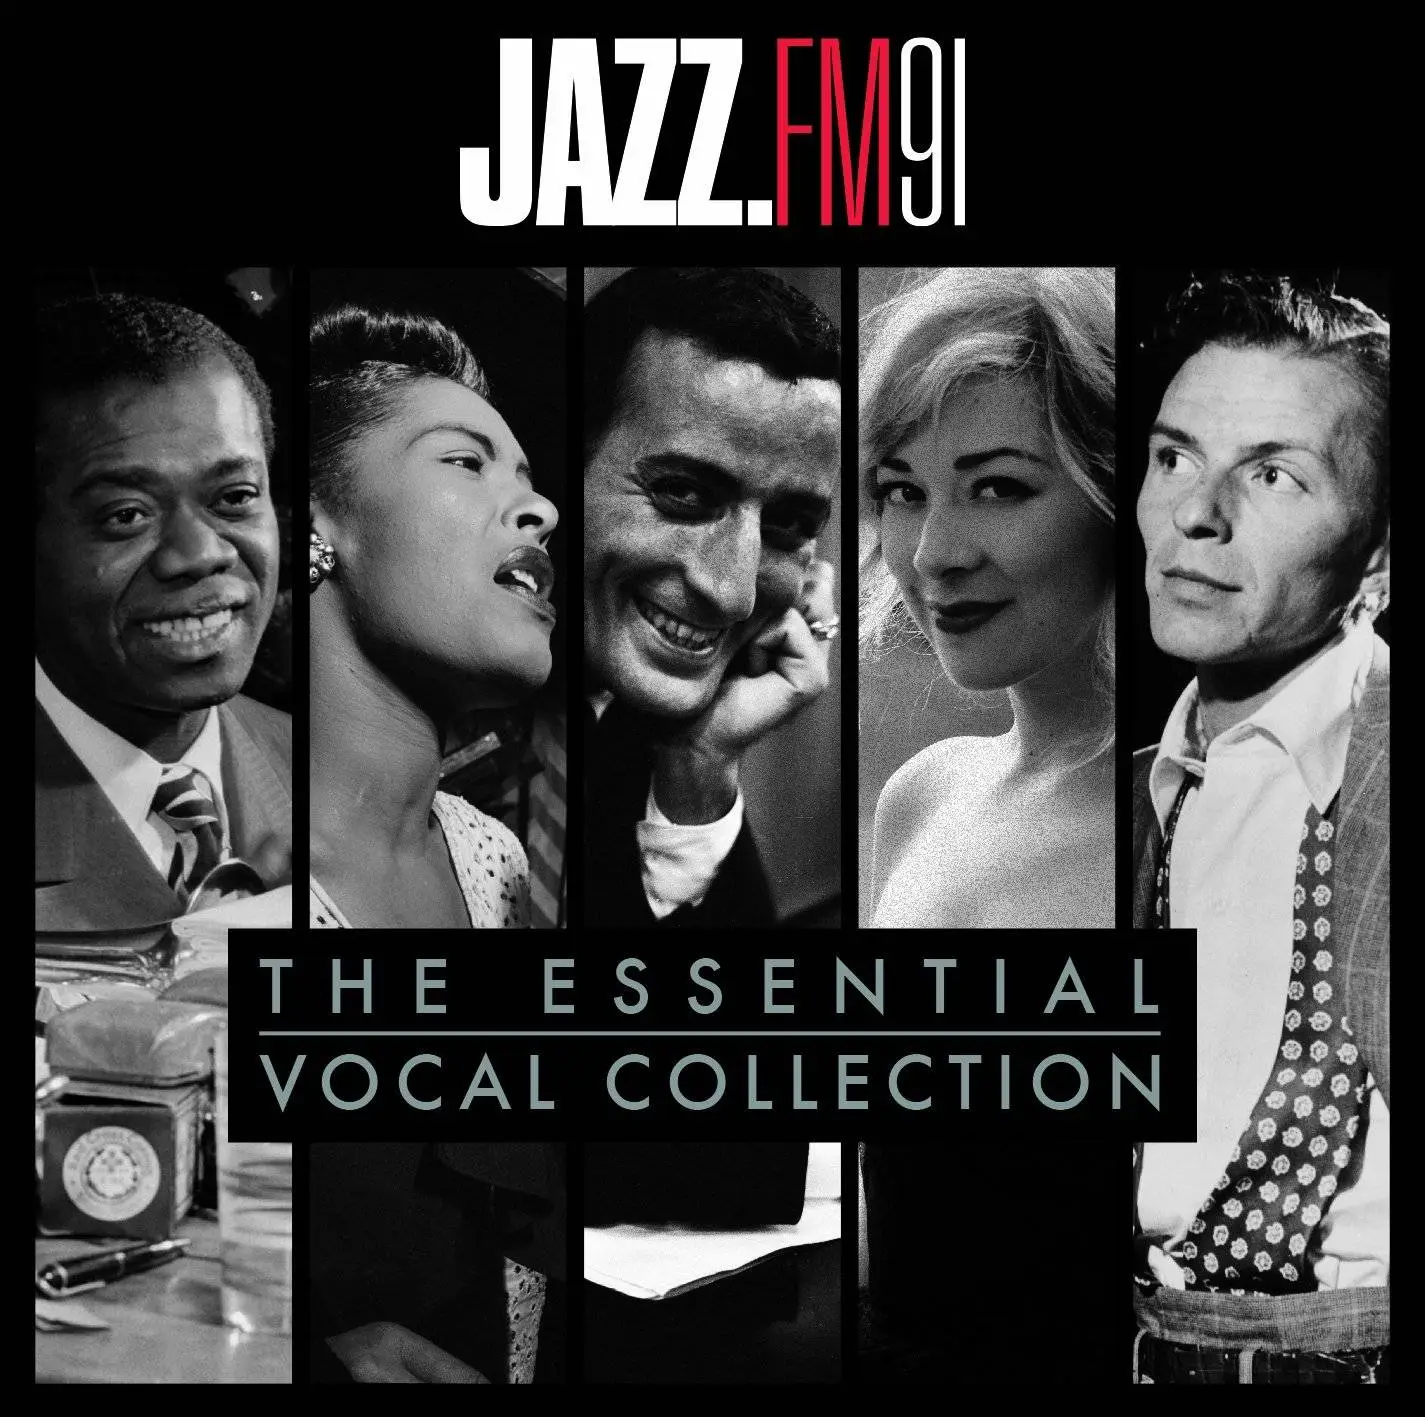 Flac 2014. Vocal Jazz collection. Jazz fm. Vocal Collective. Jazz Vocal Group.